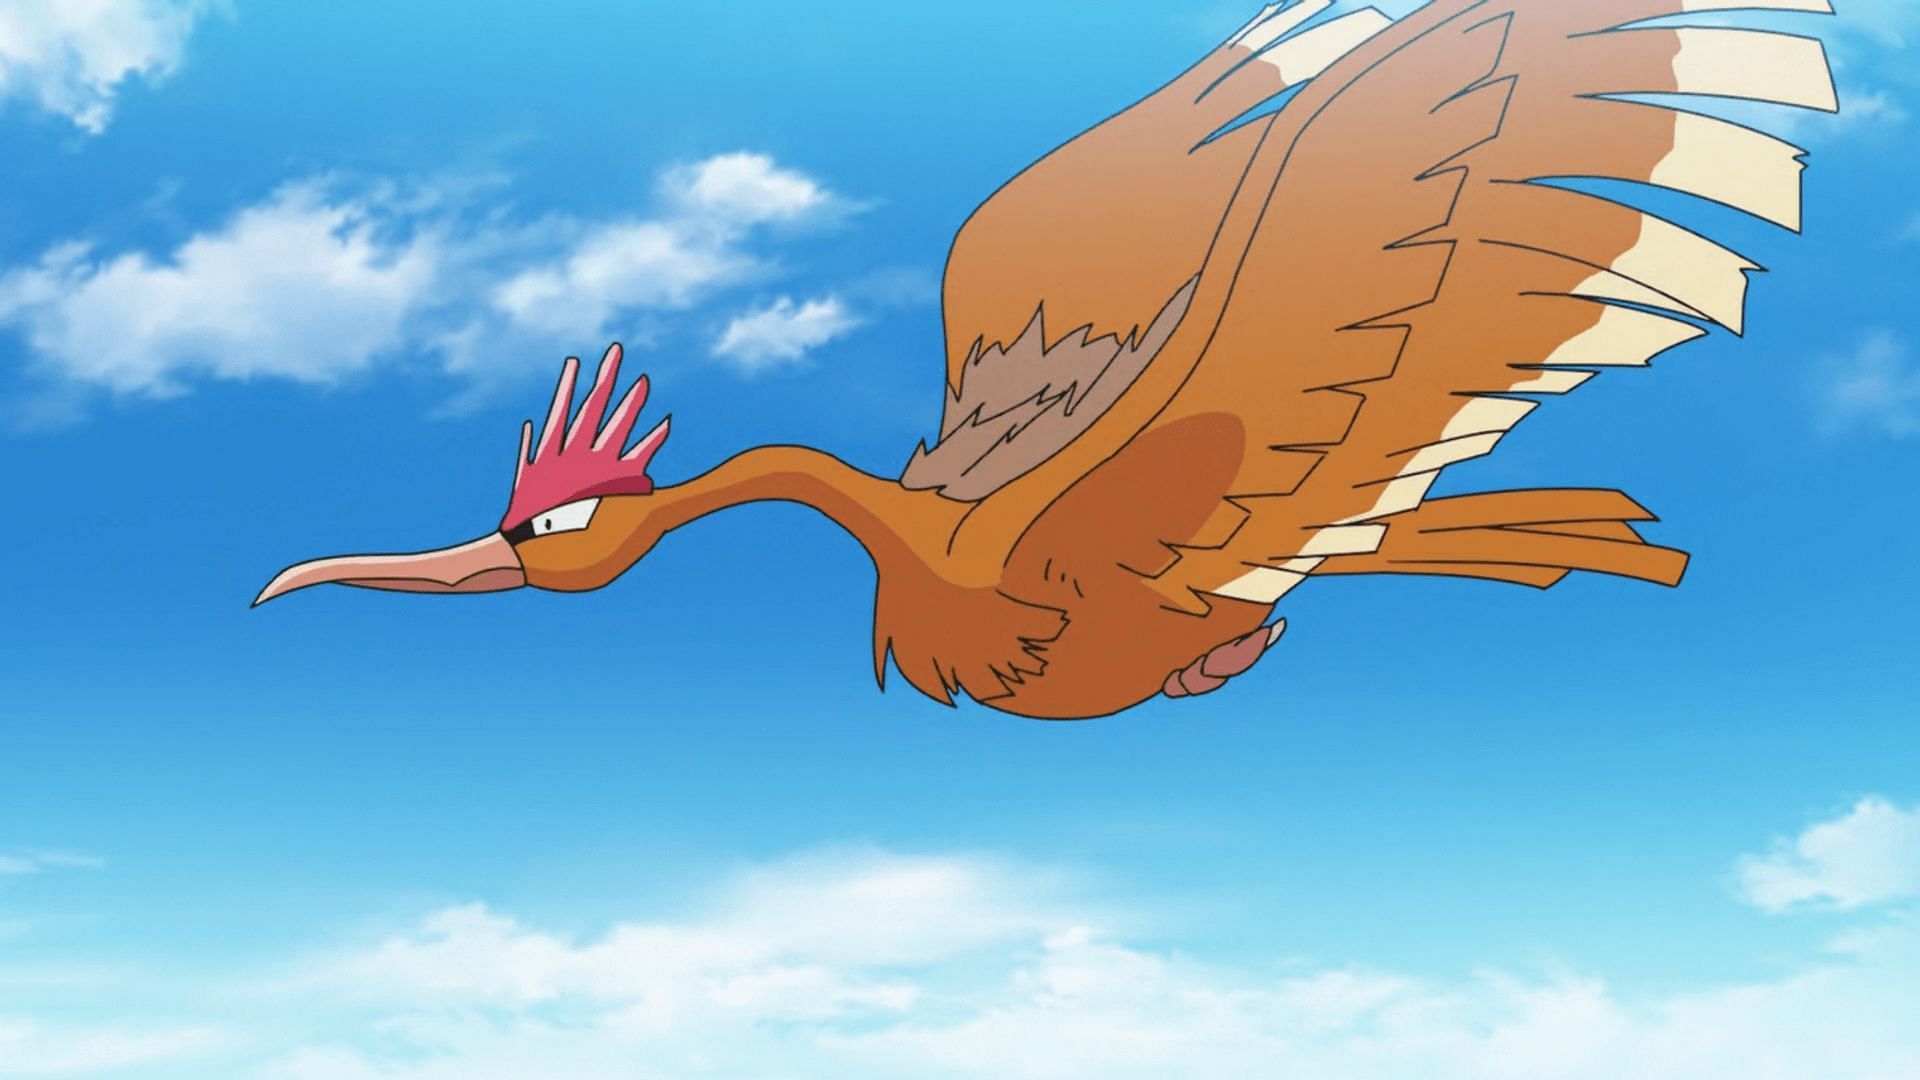 Fearow as it appears in the anime (Image via The Pokemon Company)